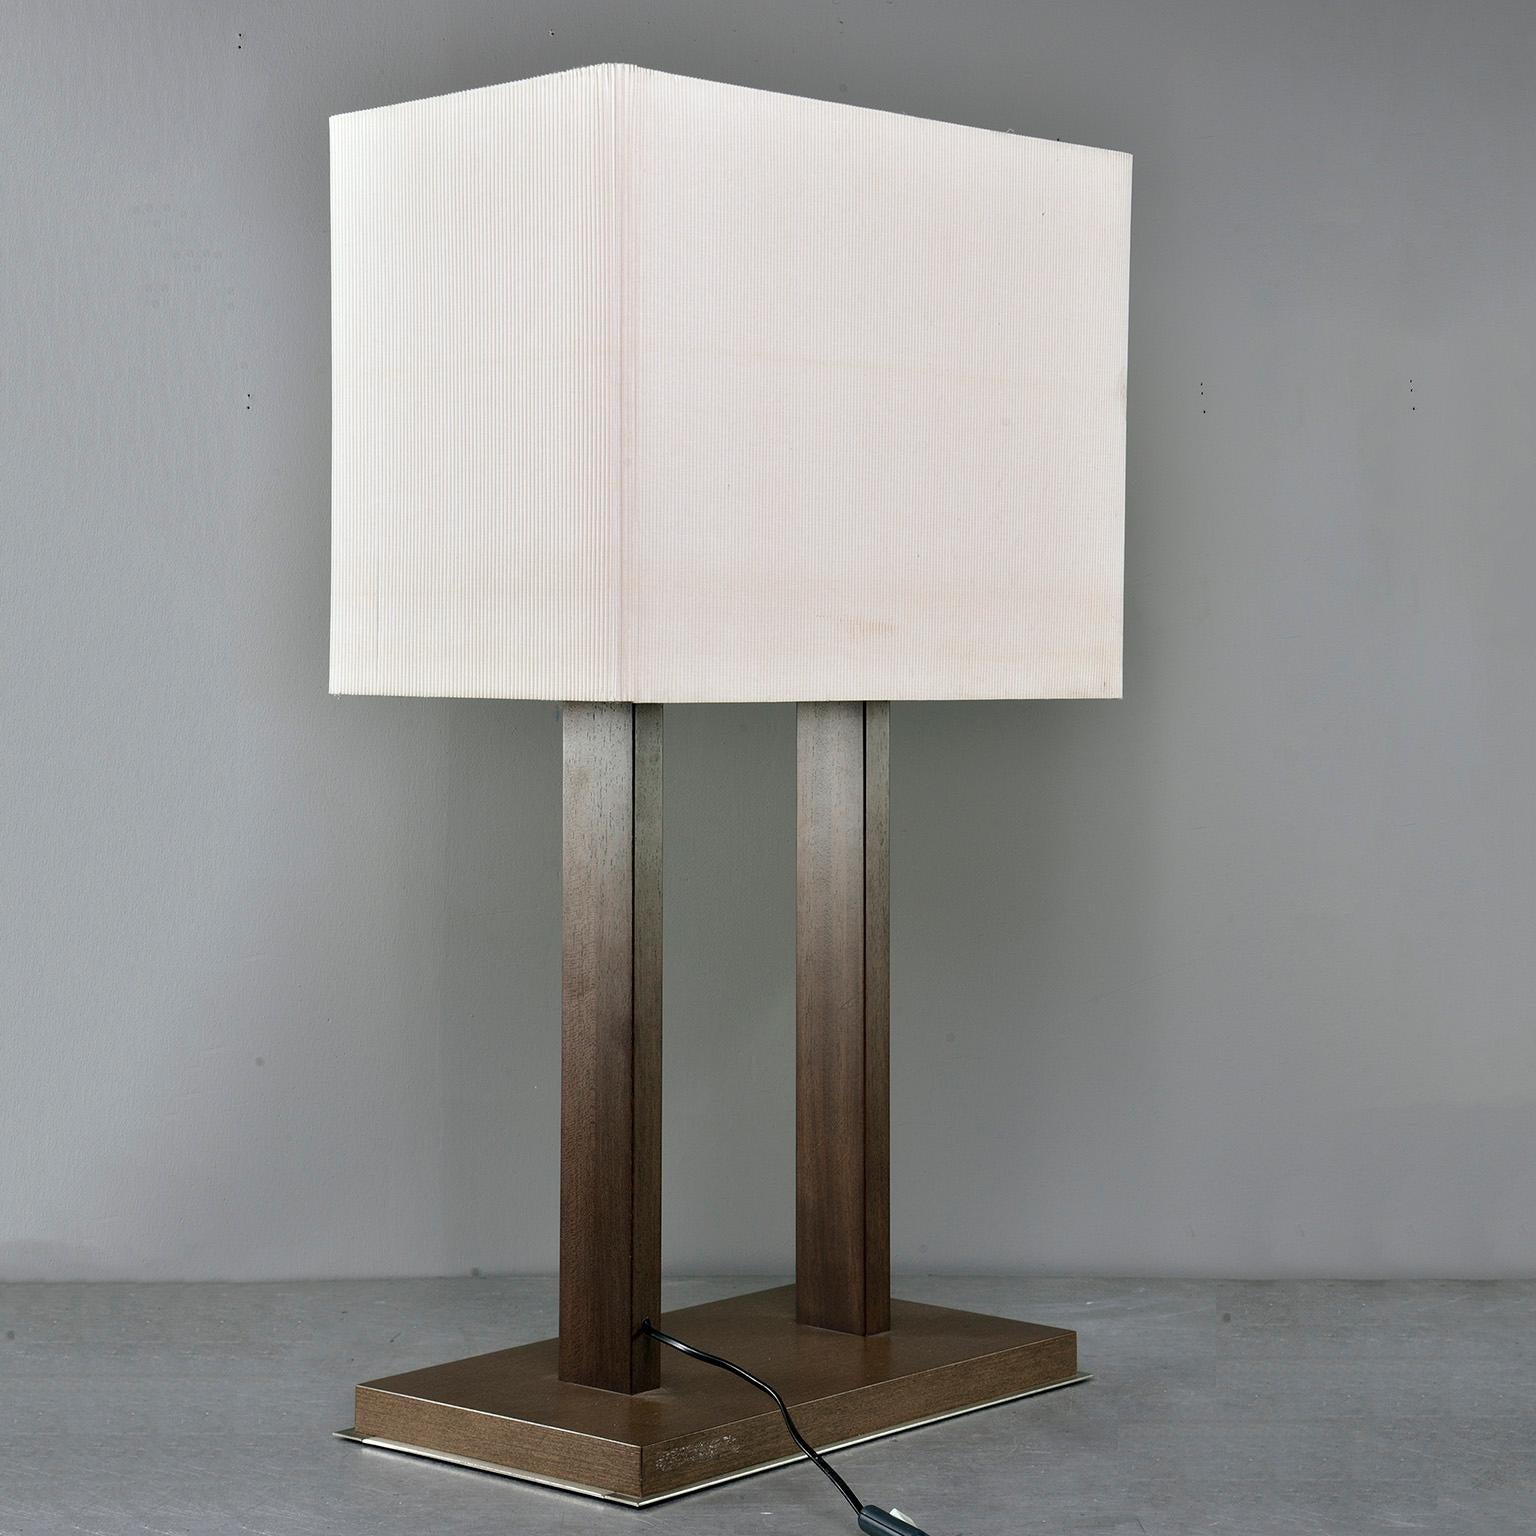 Tall table lamp has a base of walnut layered over brushed steel with walnut supports and a tightly pleated rectangular shade, circa 1970s. Unknown maker. Found in Italy. New wiring for US electrical standards.

Measures: Shade only: 15.5” H x 20”